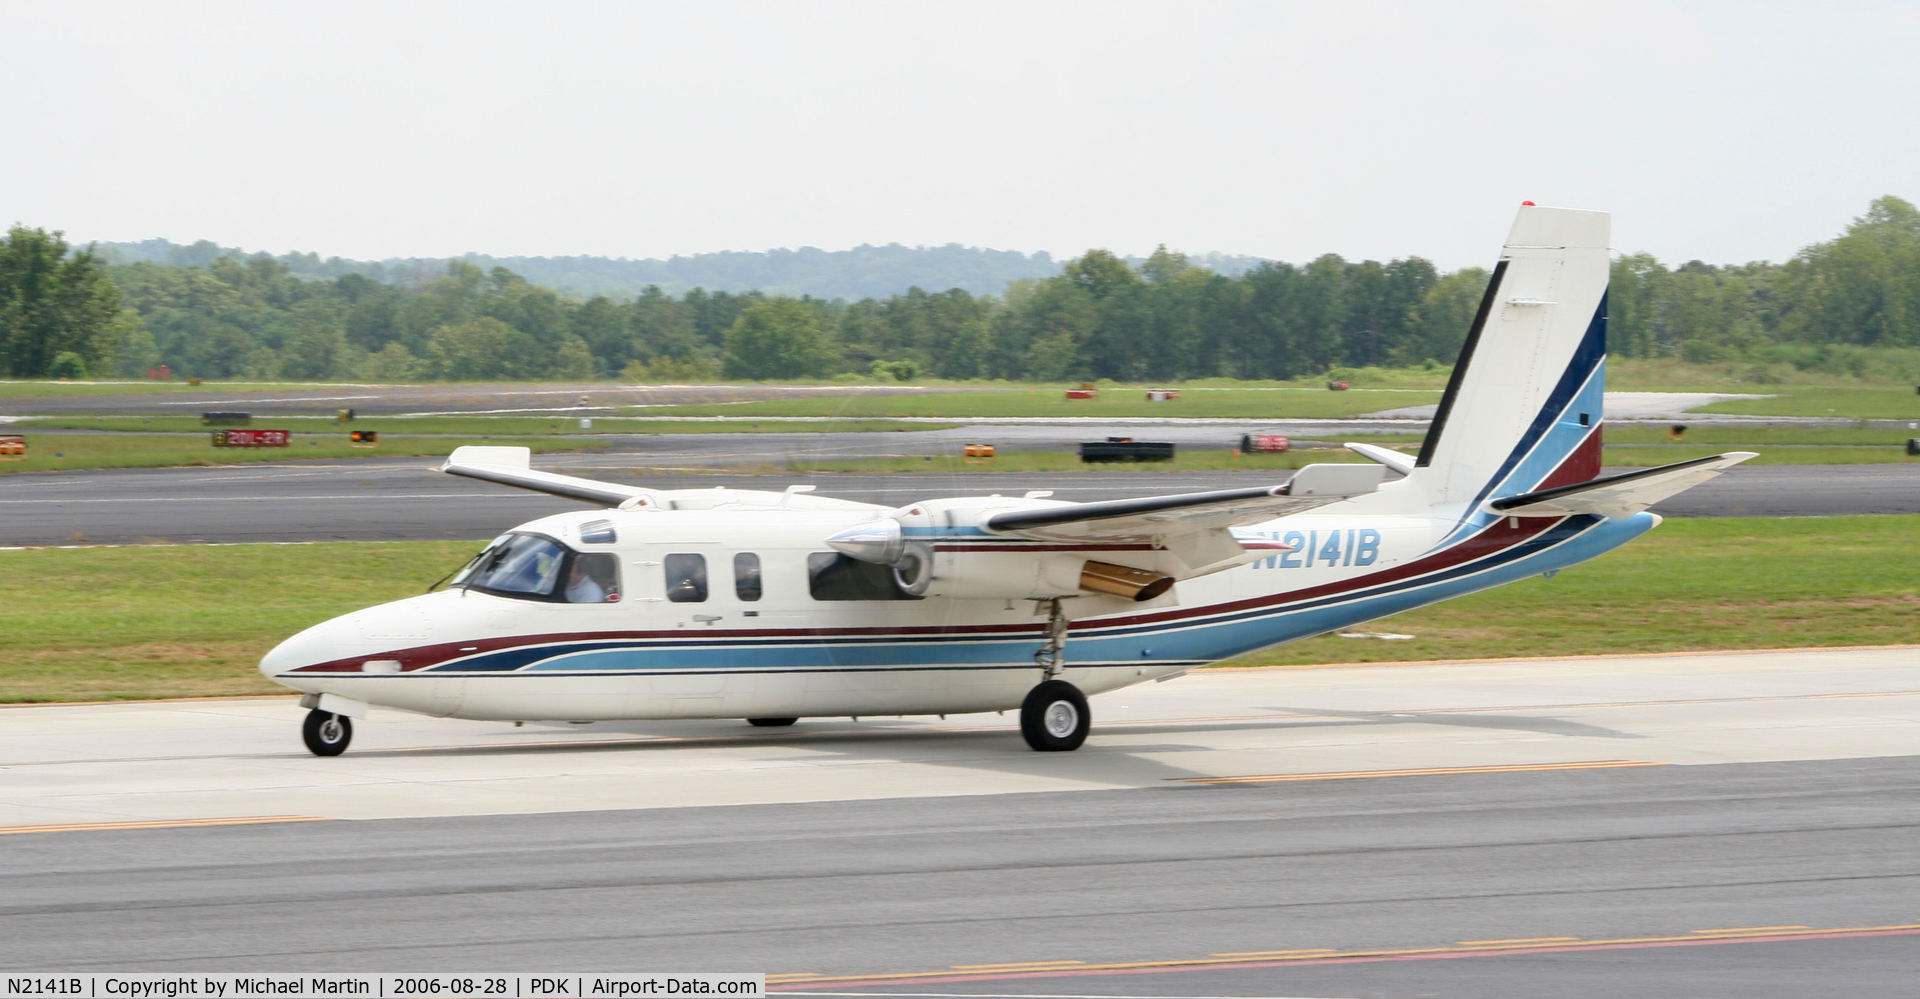 N2141B, 1978 Rockwell 690B Turbo Commander C/N 11484, Taxing to Epps Air Service